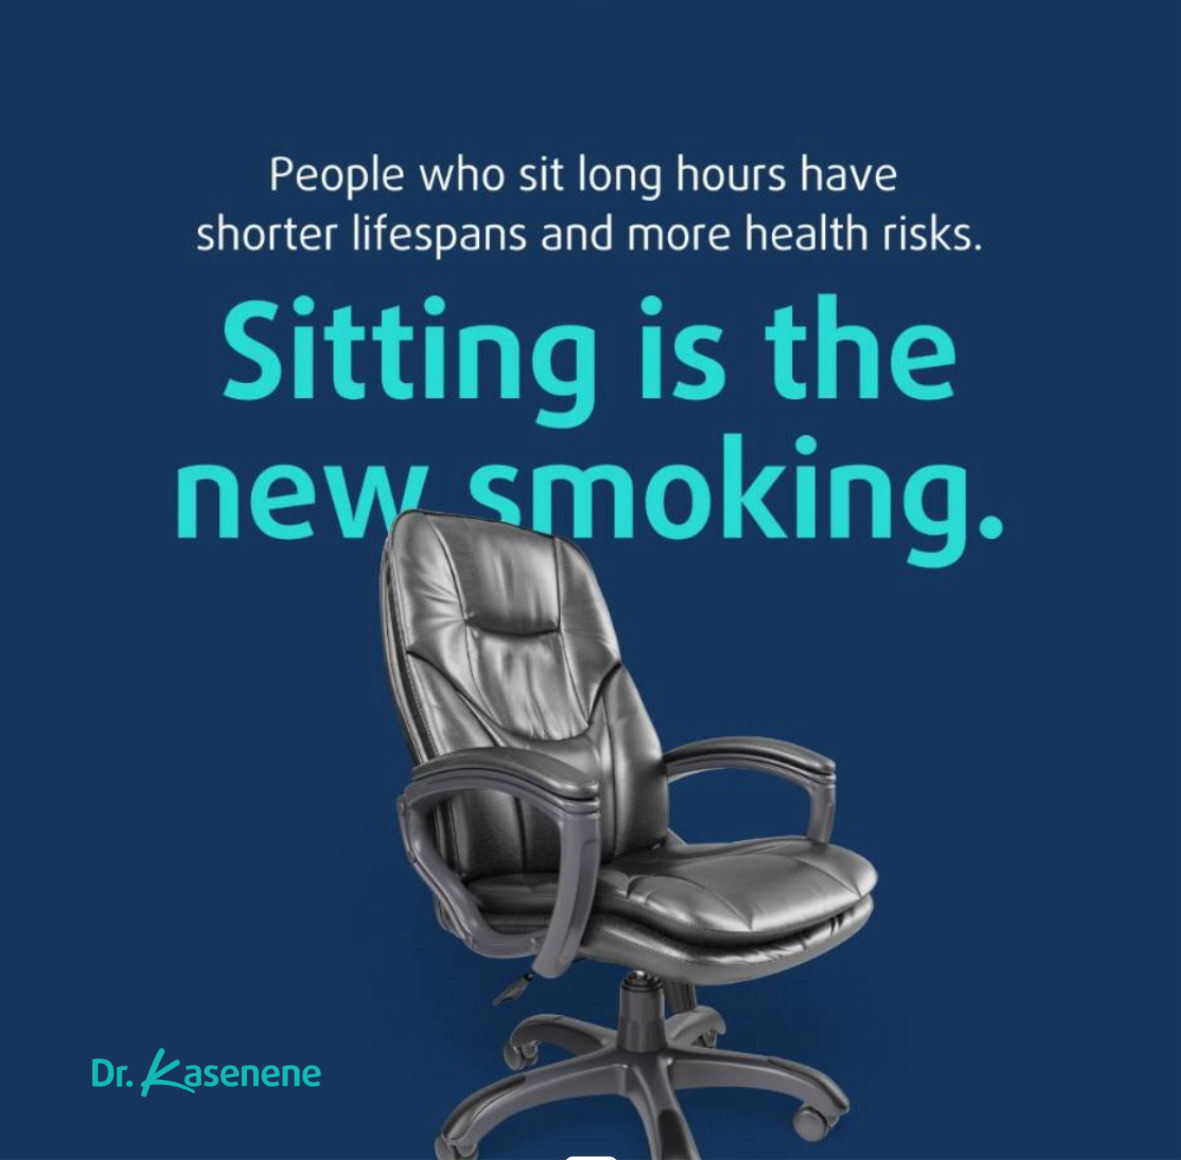 Sitting for long periods uninterrupted is harmful for health. Always make an effort to get up at least each hour and stretch or move around. We often take this for granted because there don’t seem to be any immediate negative effects. But they are there and are profound.